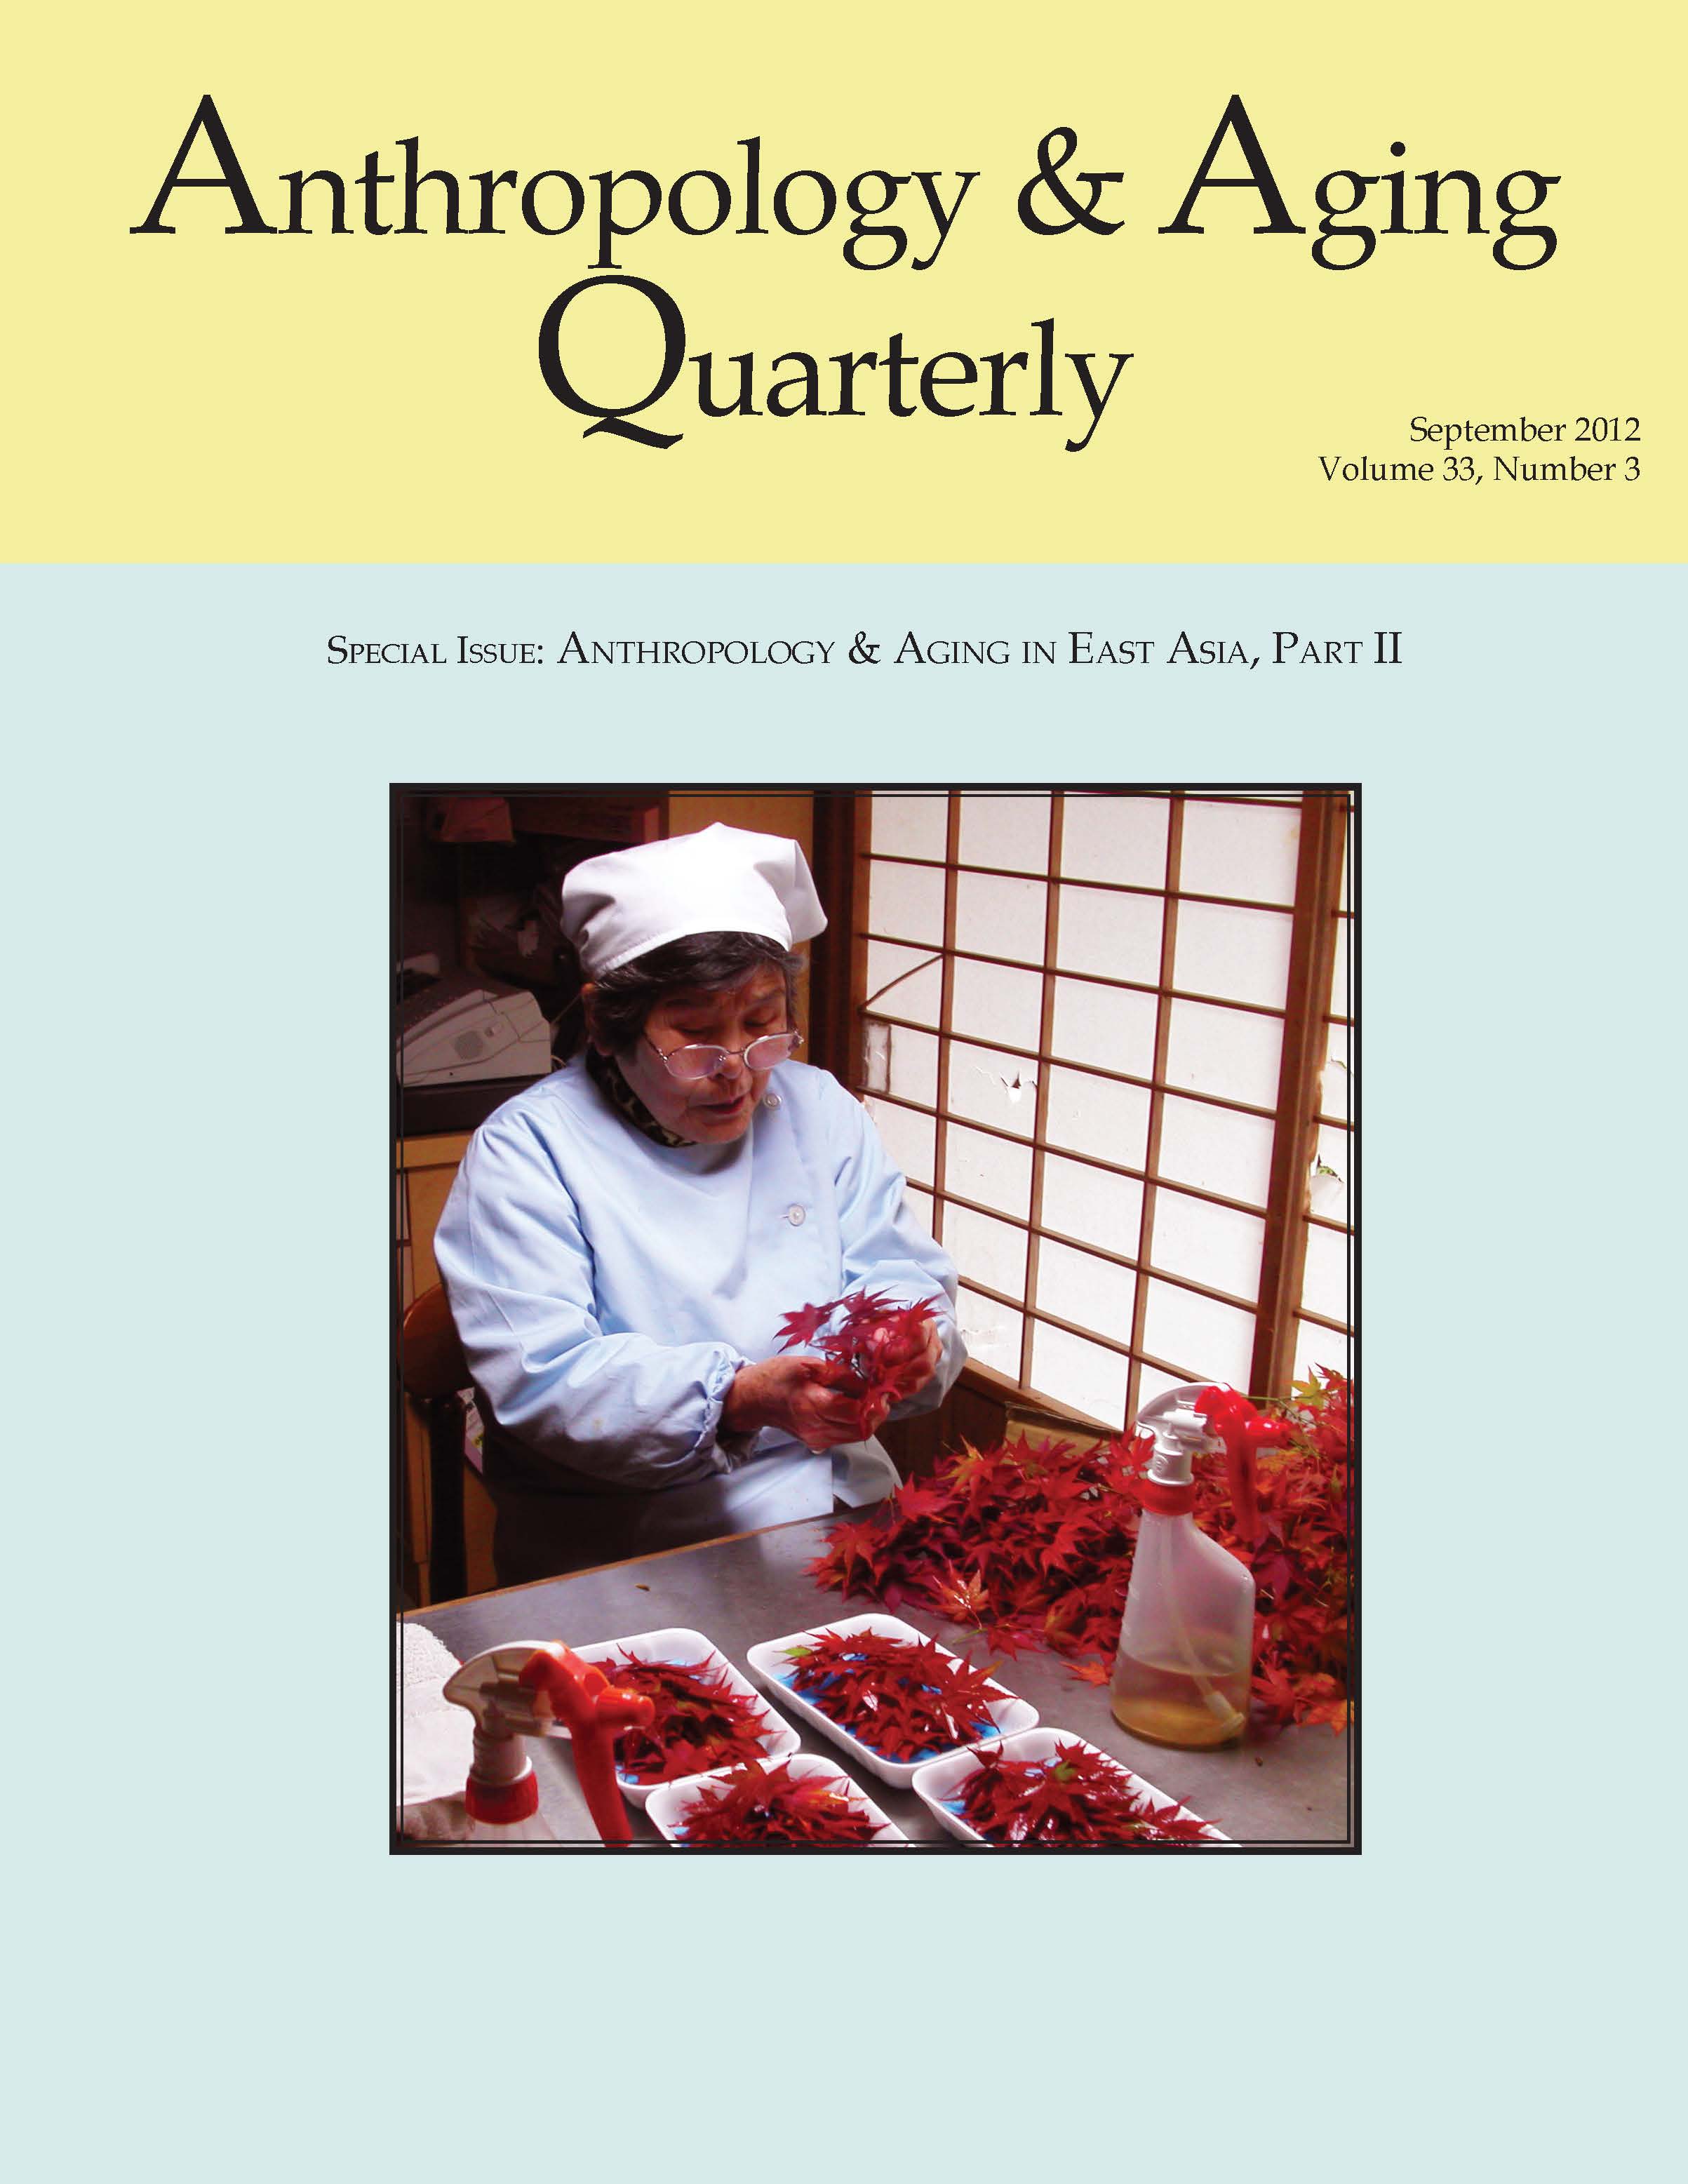 					View Vol. 33 No. 3 (2012): Special Issue on Anthropology and Aging in East Asia II
				